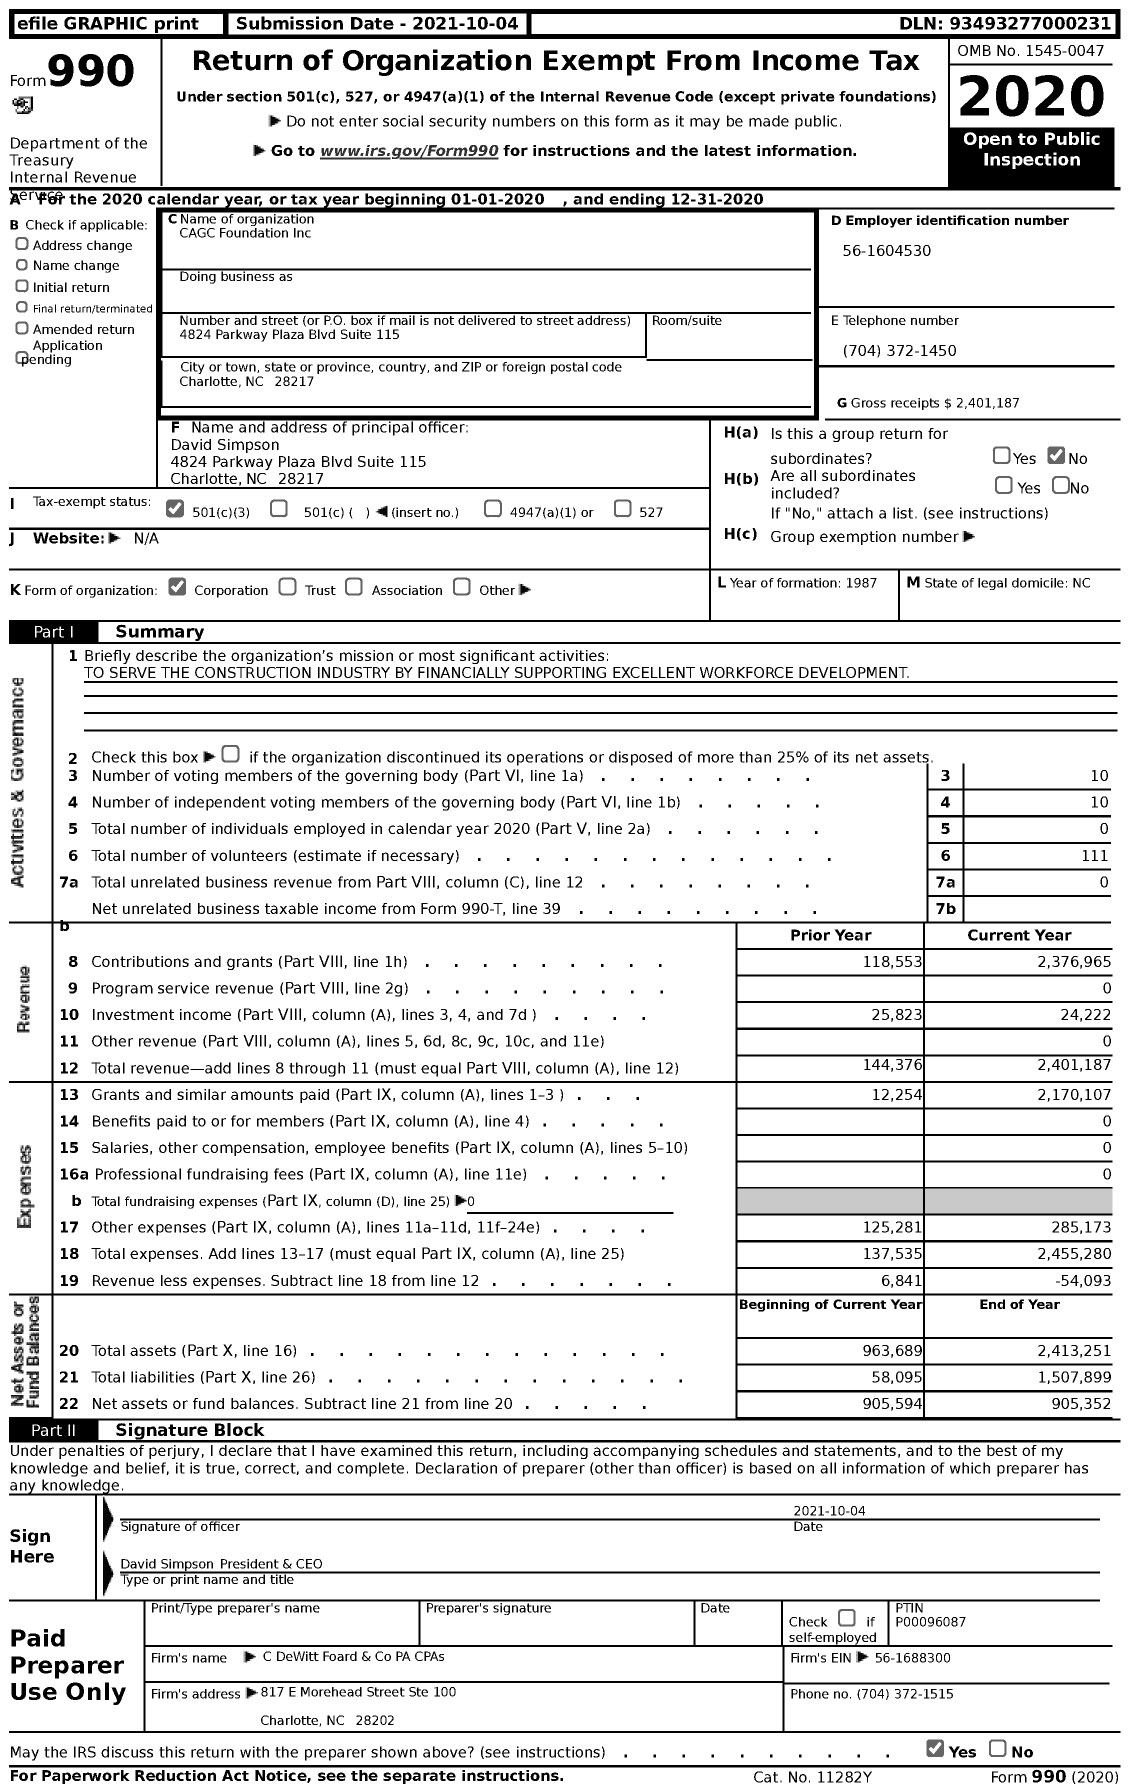 Image of first page of 2020 Form 990 for CAGC foundation